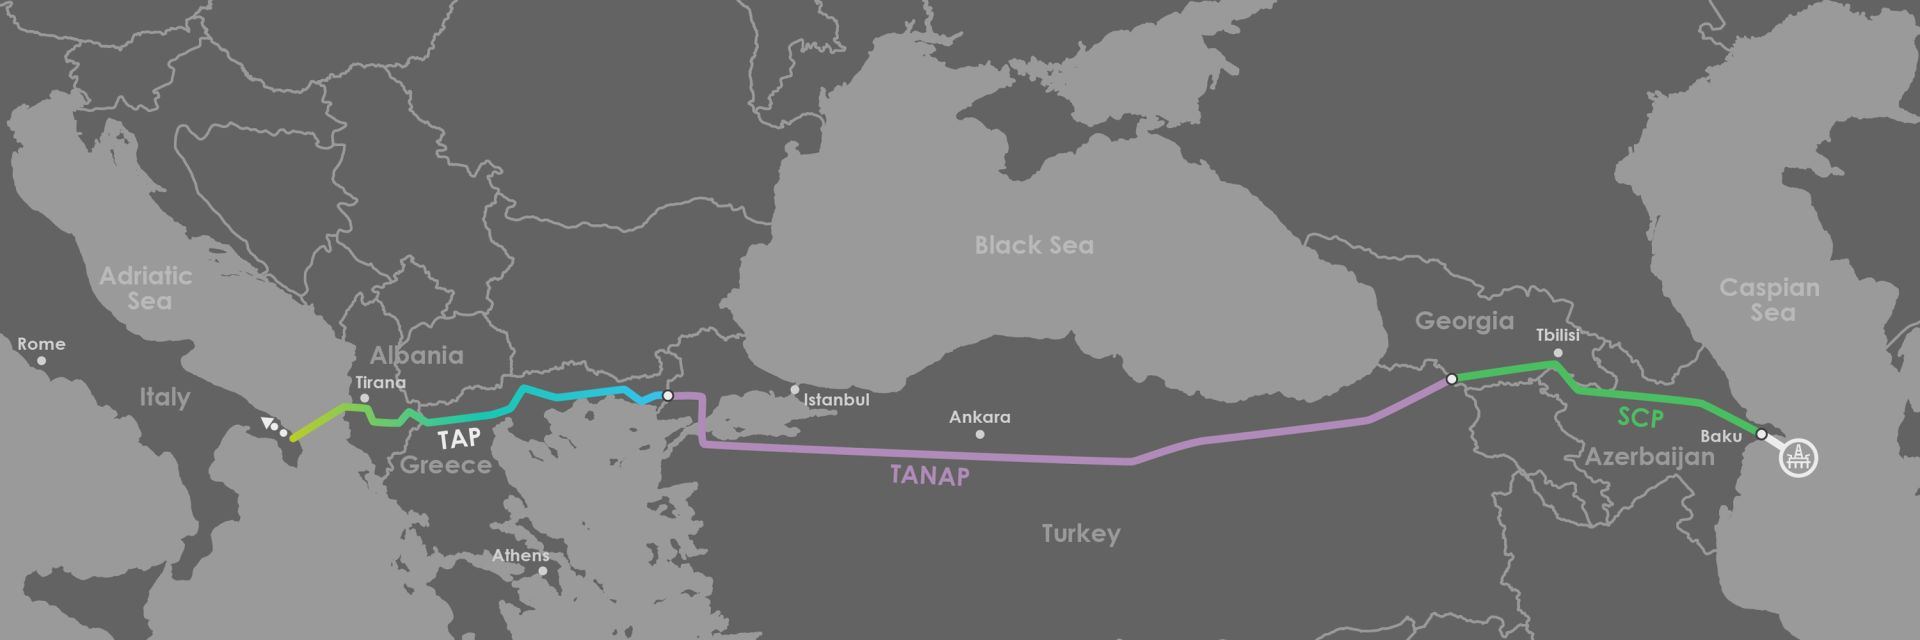 Azerbaijan values partnering with US in expanding Southern Gas Corridor